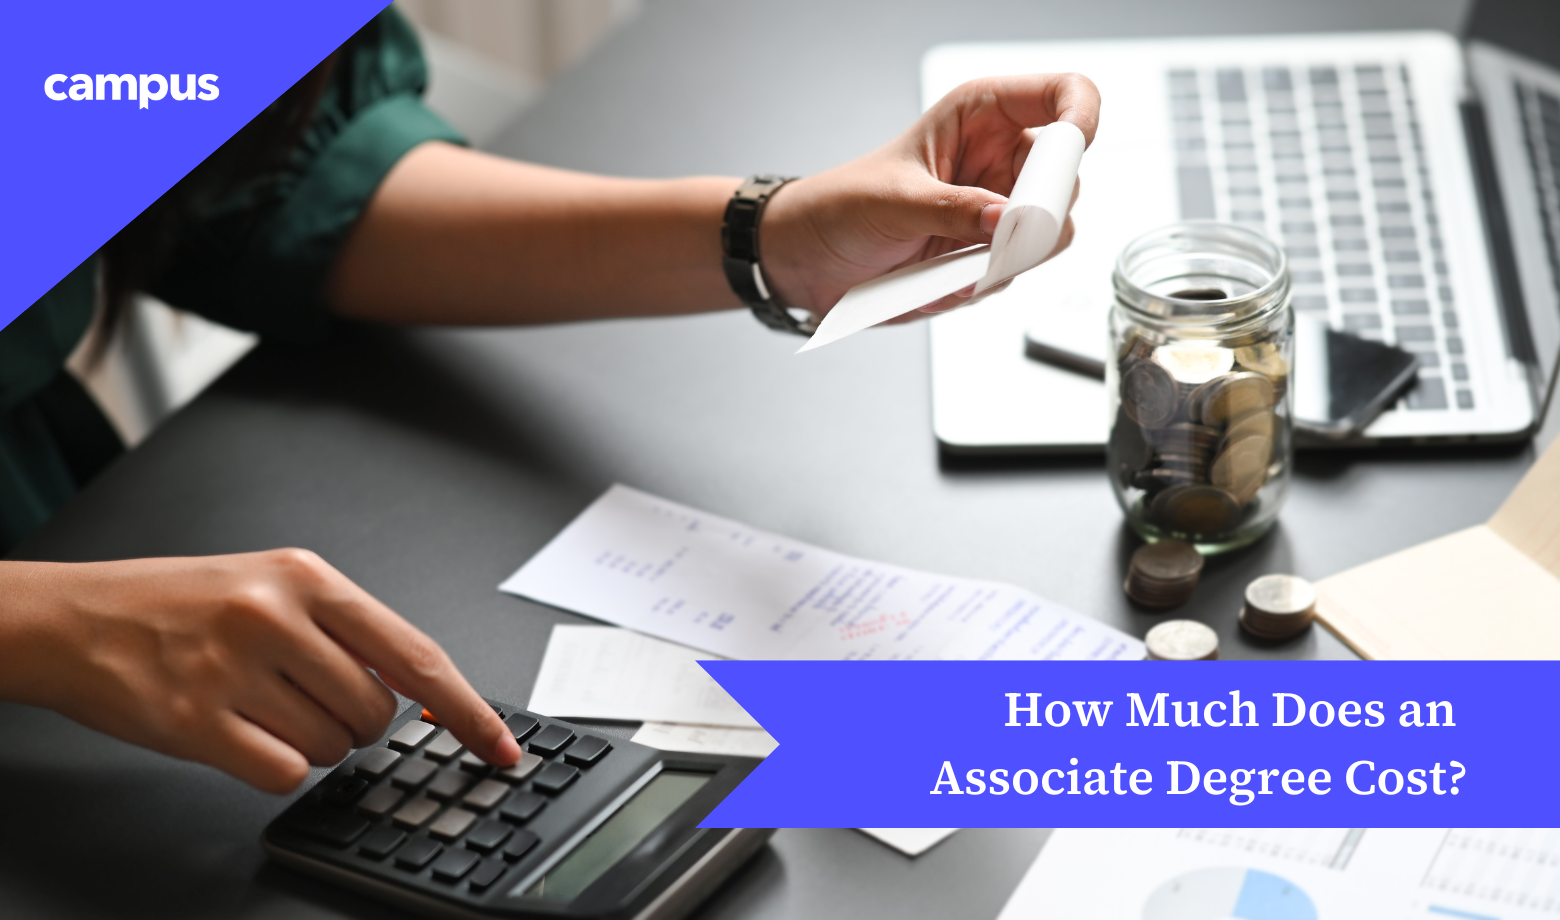 How Much Does an Associate Degree Cost?